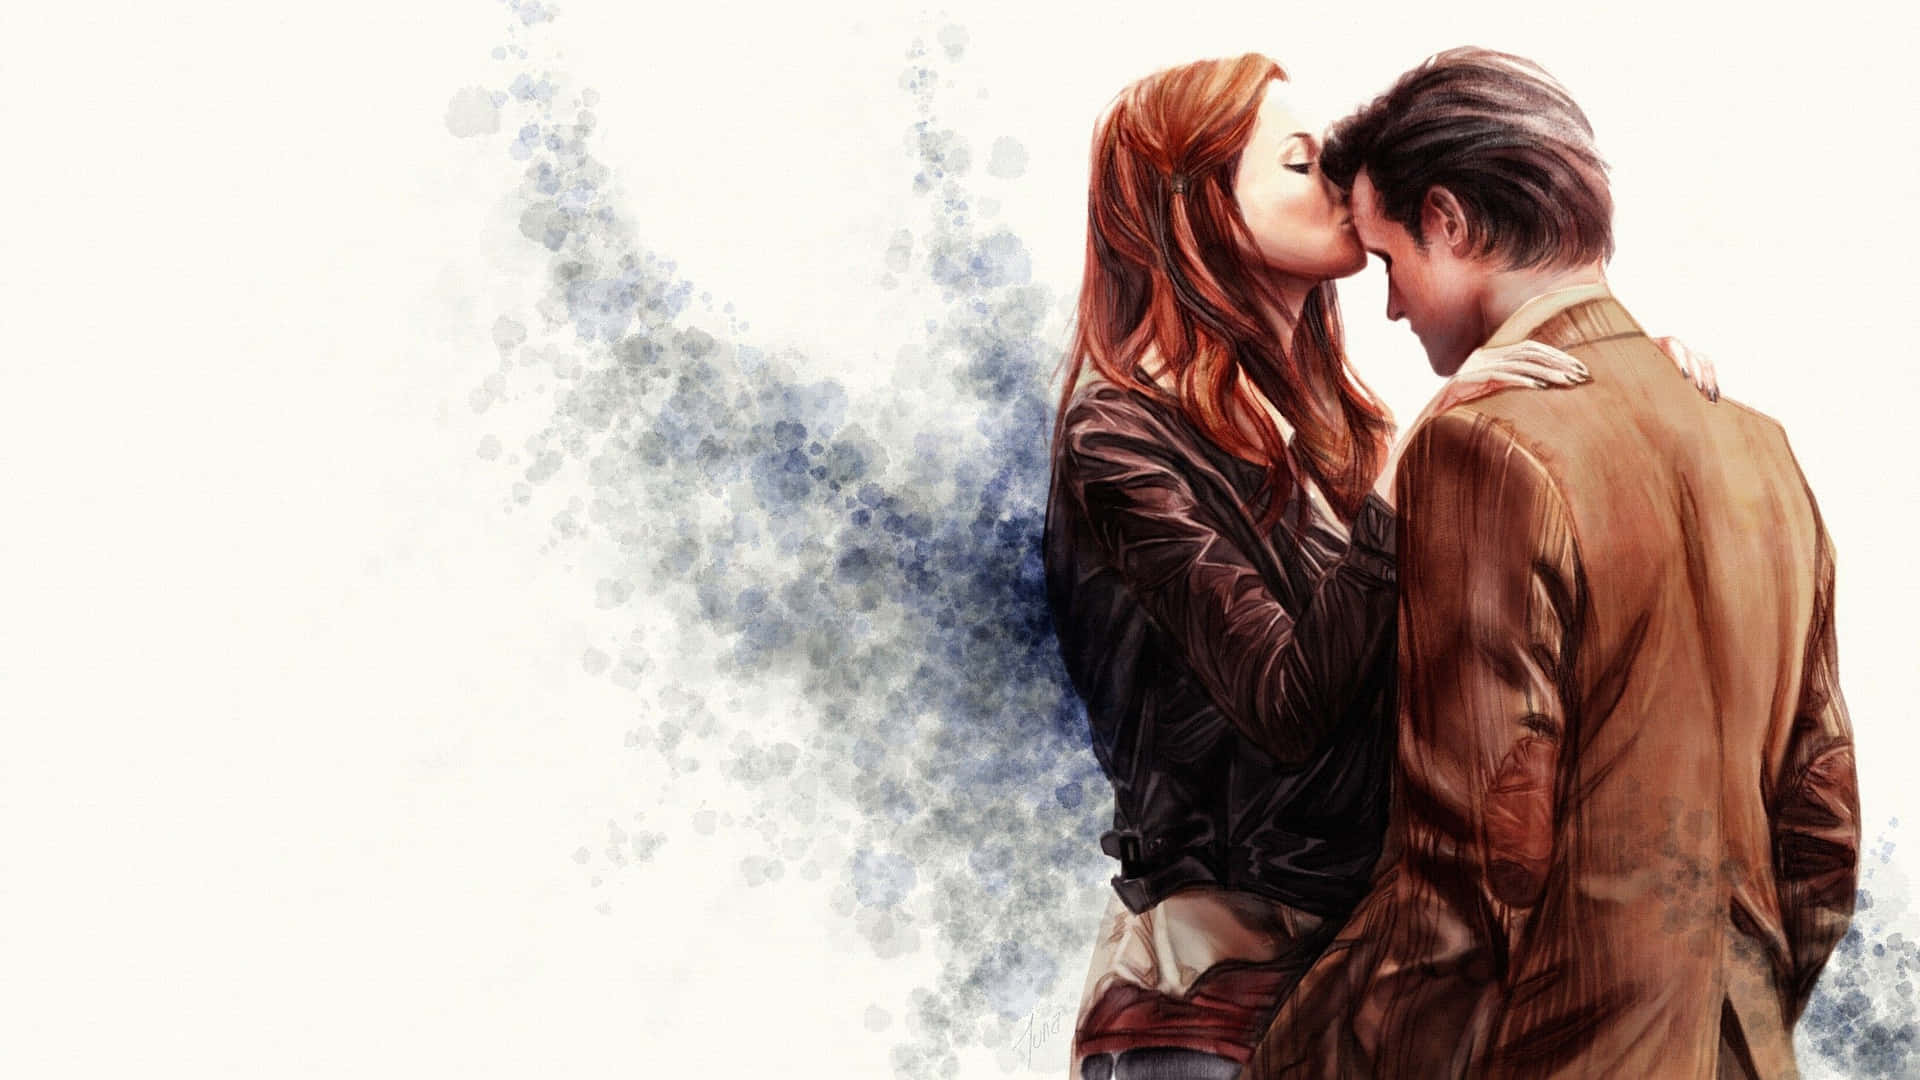 Doctor Who - A Couple Kissing